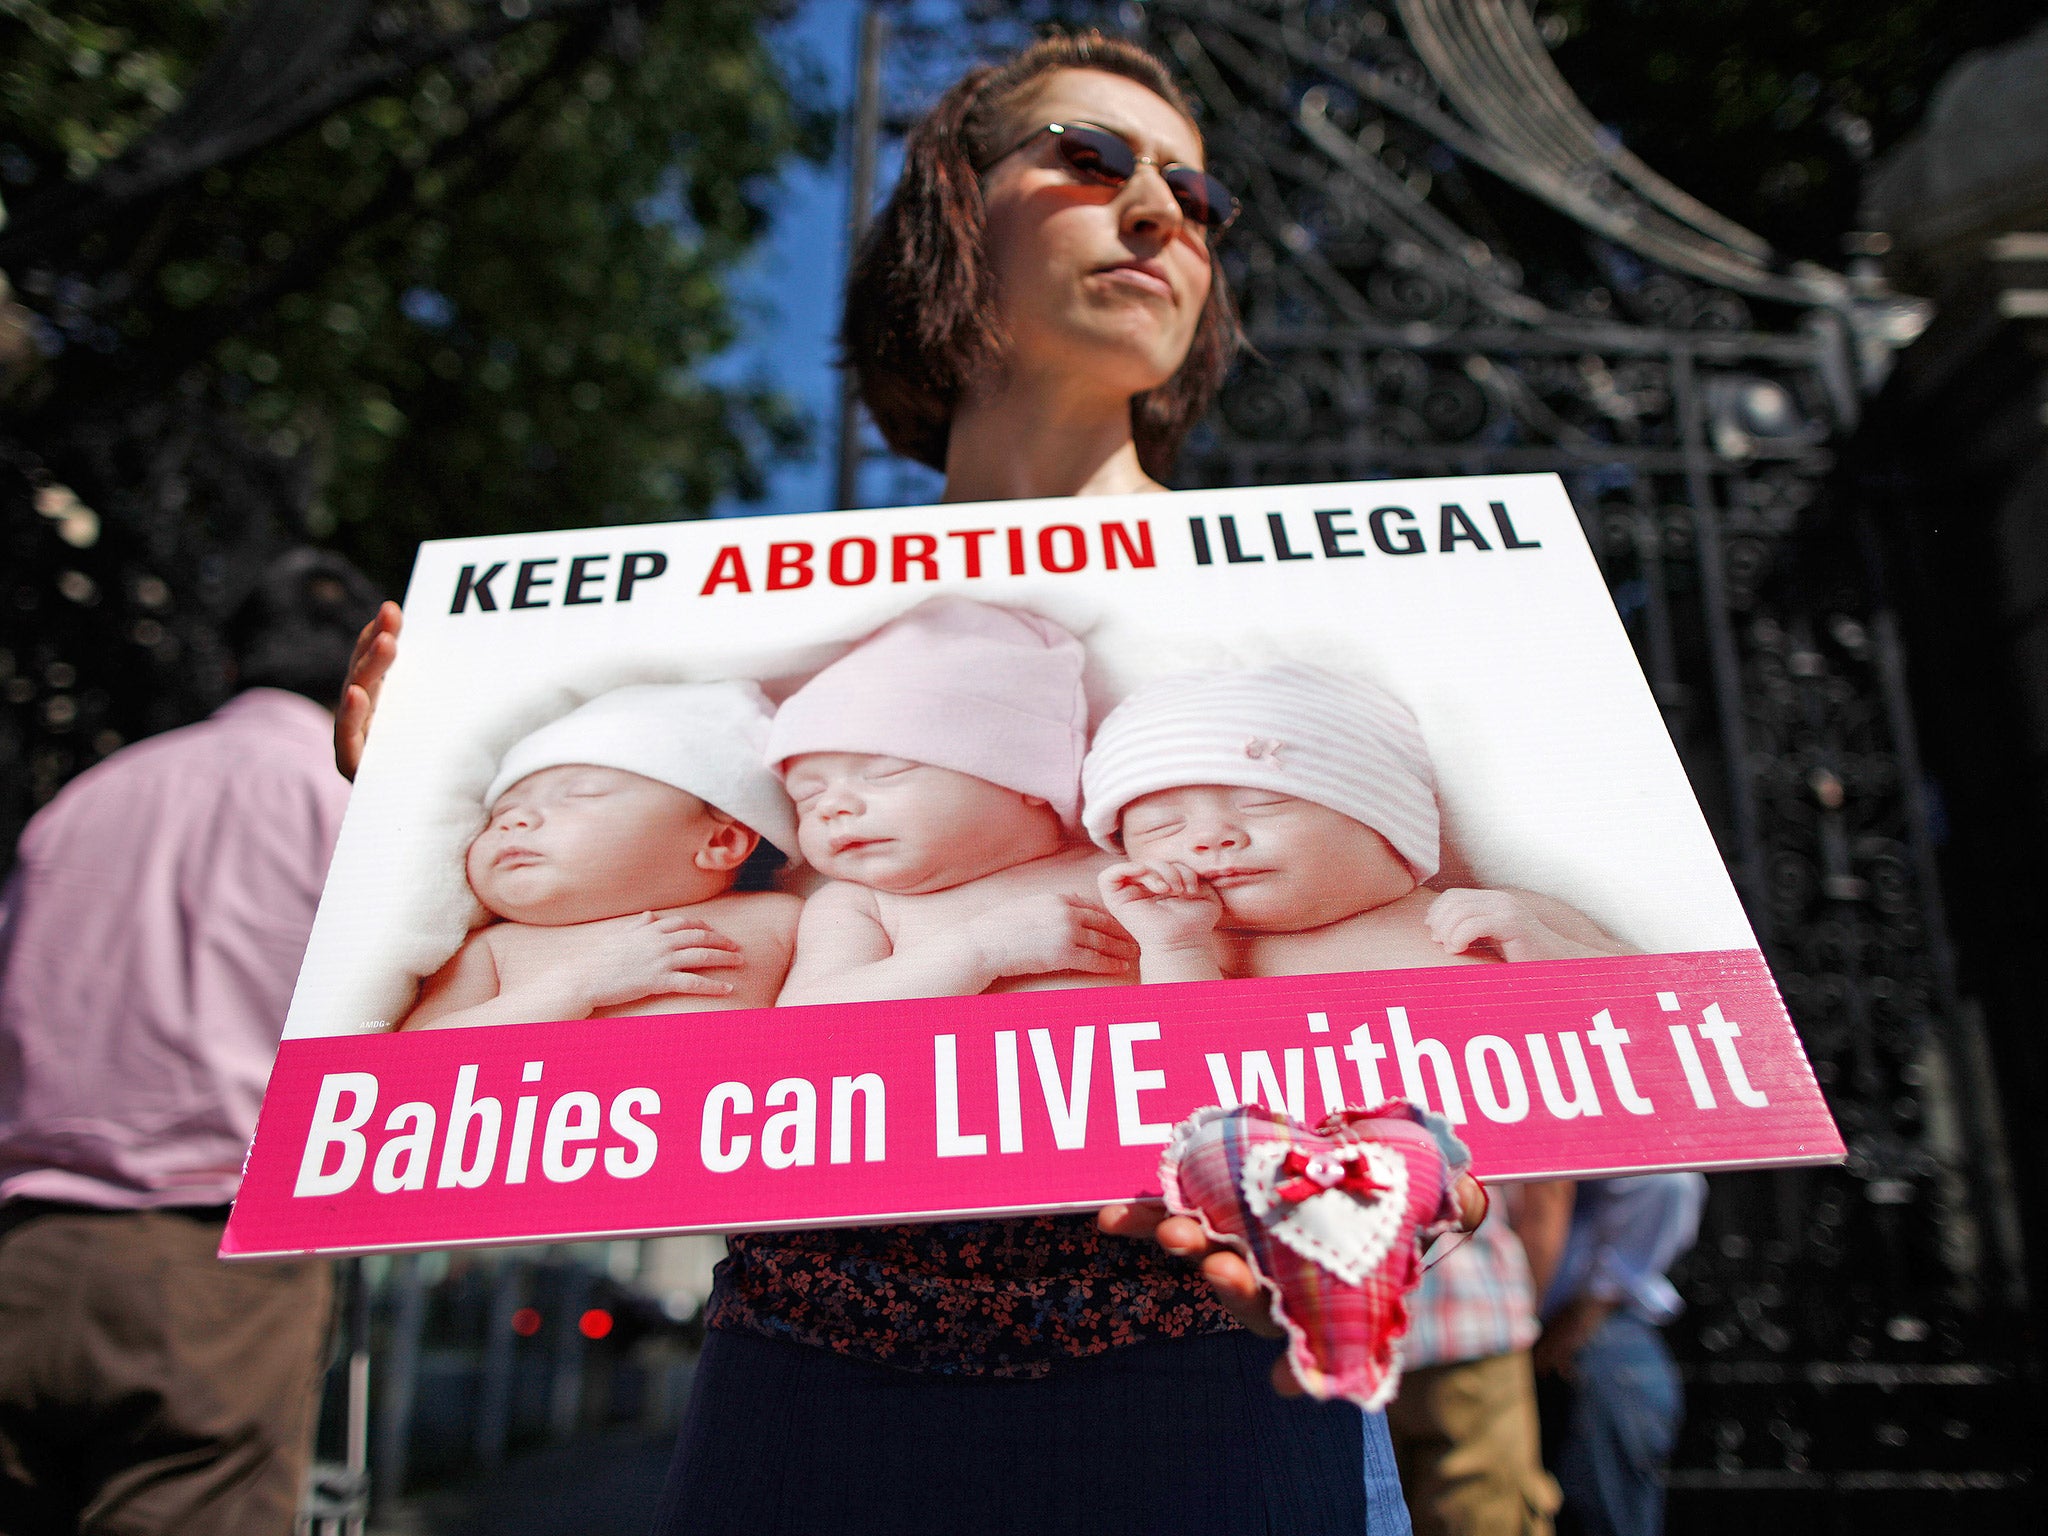 Protestors stand outside abortion clinics with disturbing banners